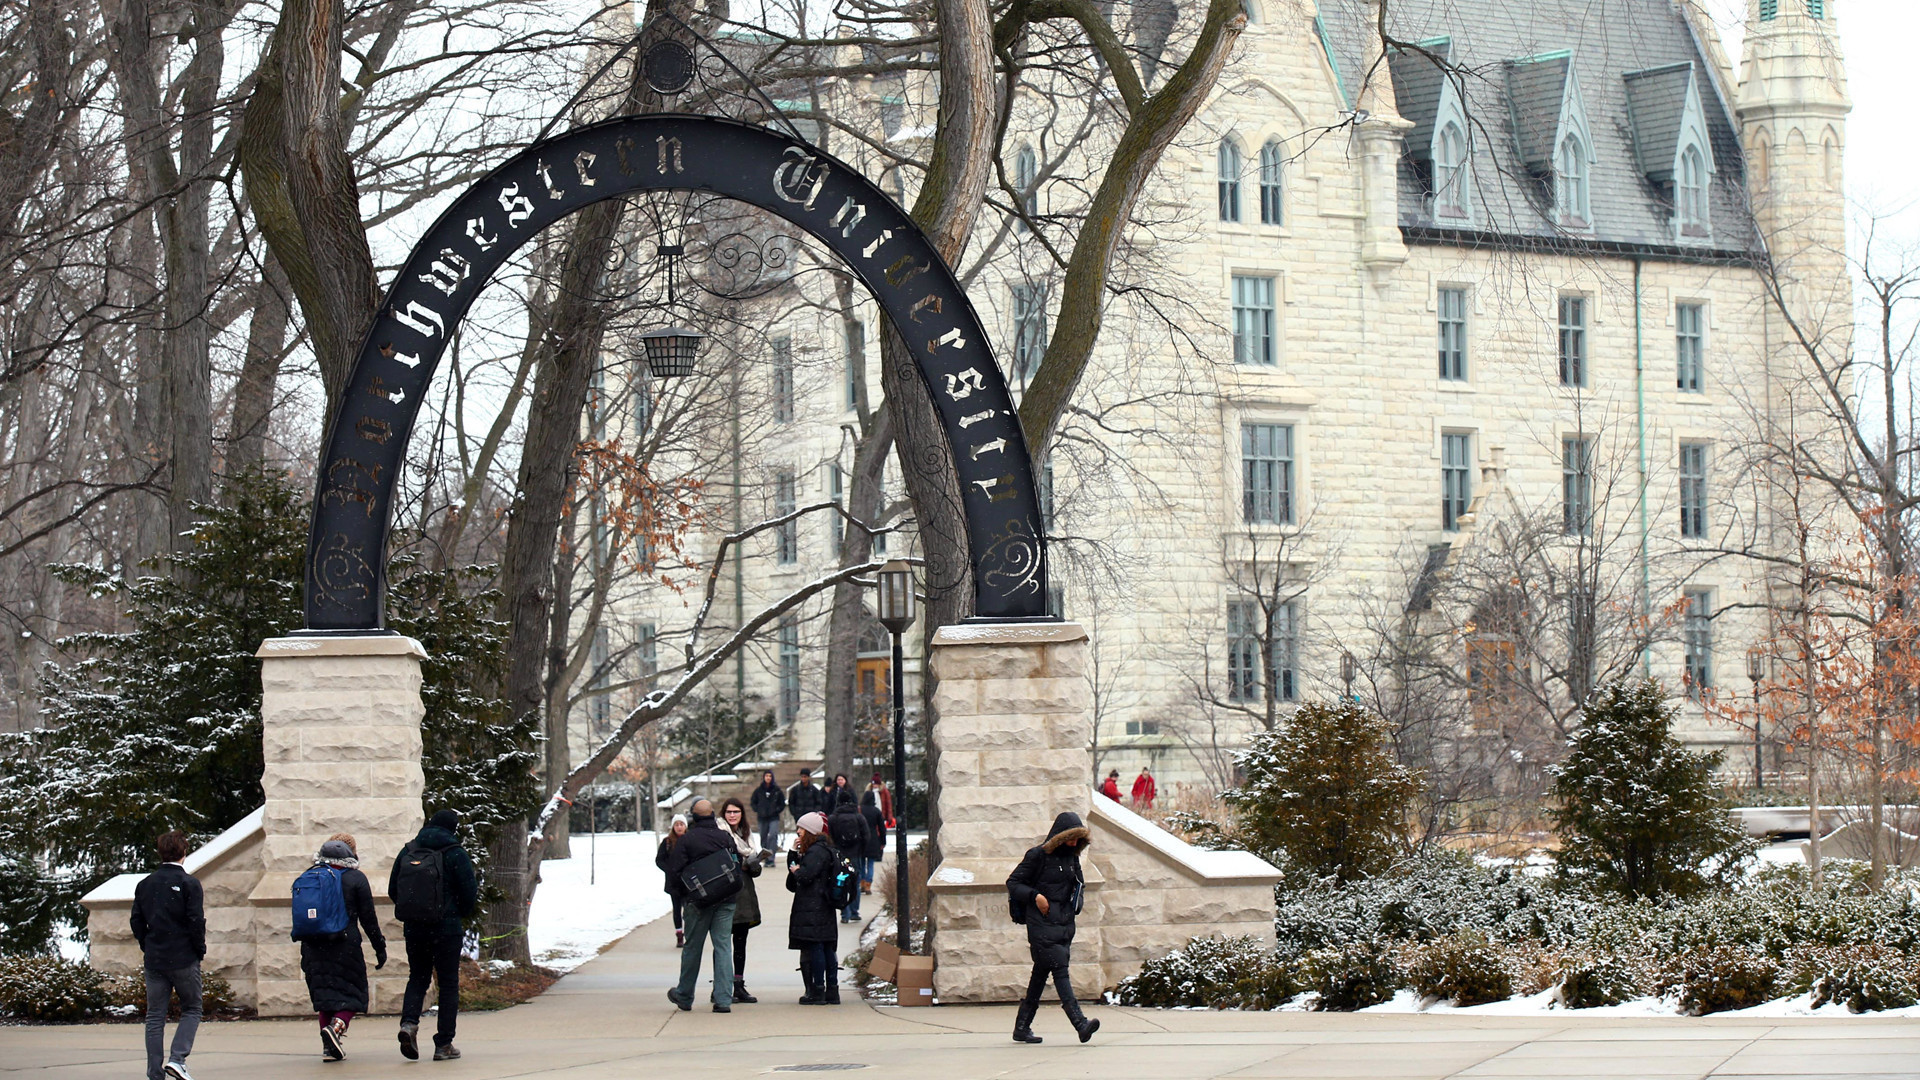 Breaking News: Reports Of Shots Fired At Northwestern University In Evanston Illinois